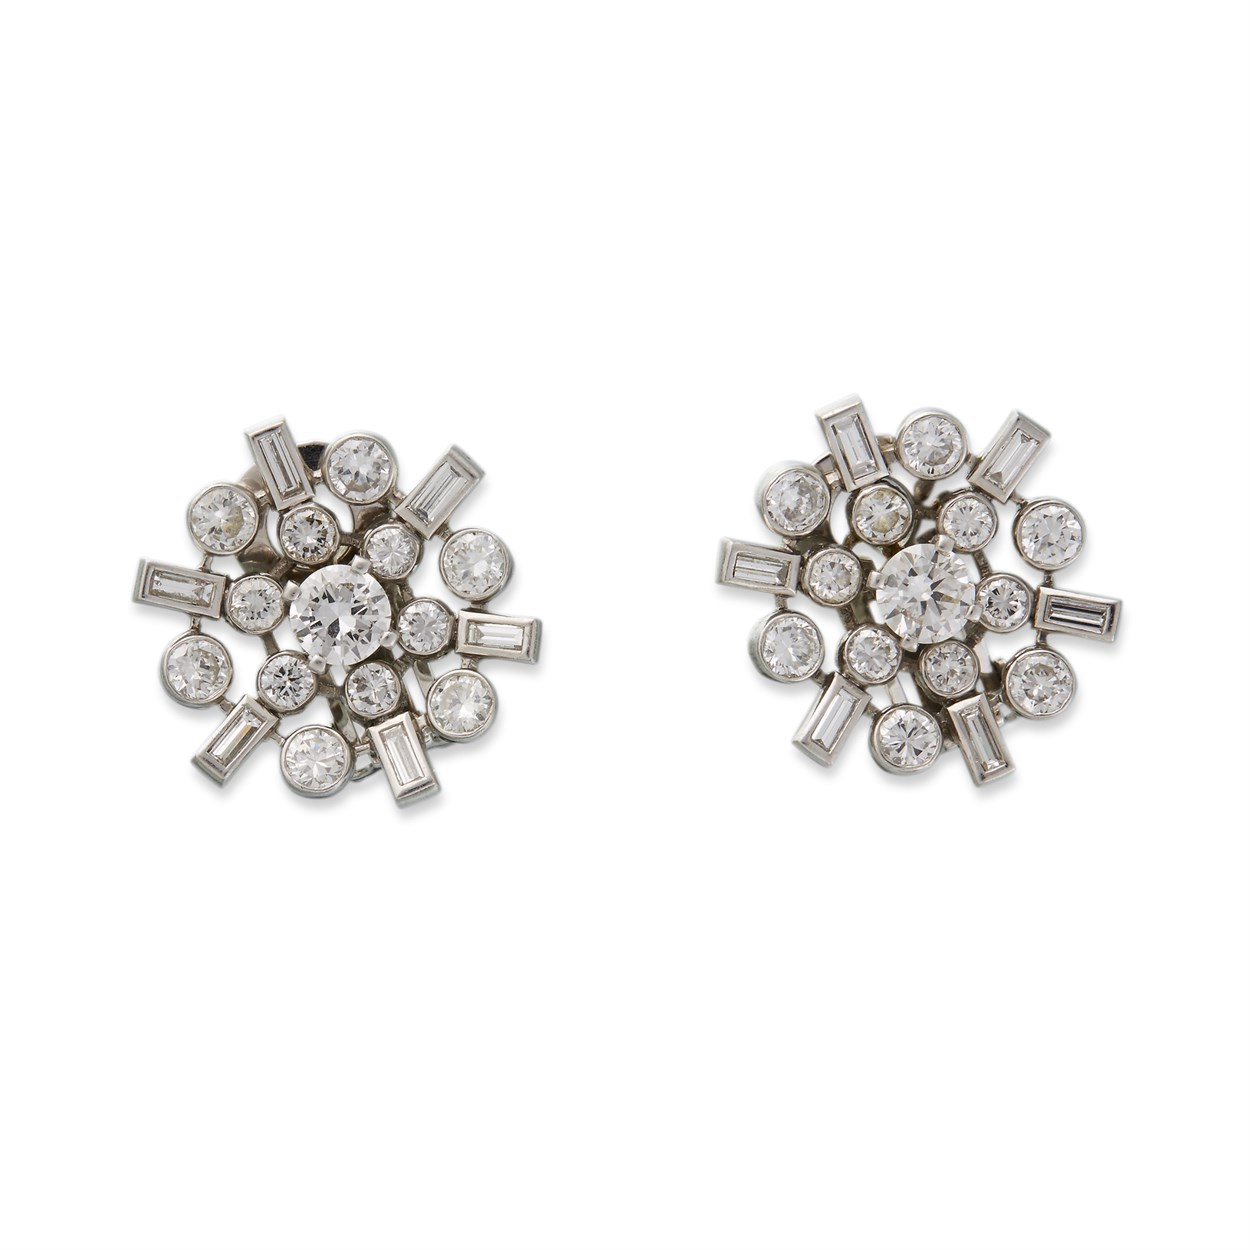 Lot 72 - A pair of diamond and platinum earrings